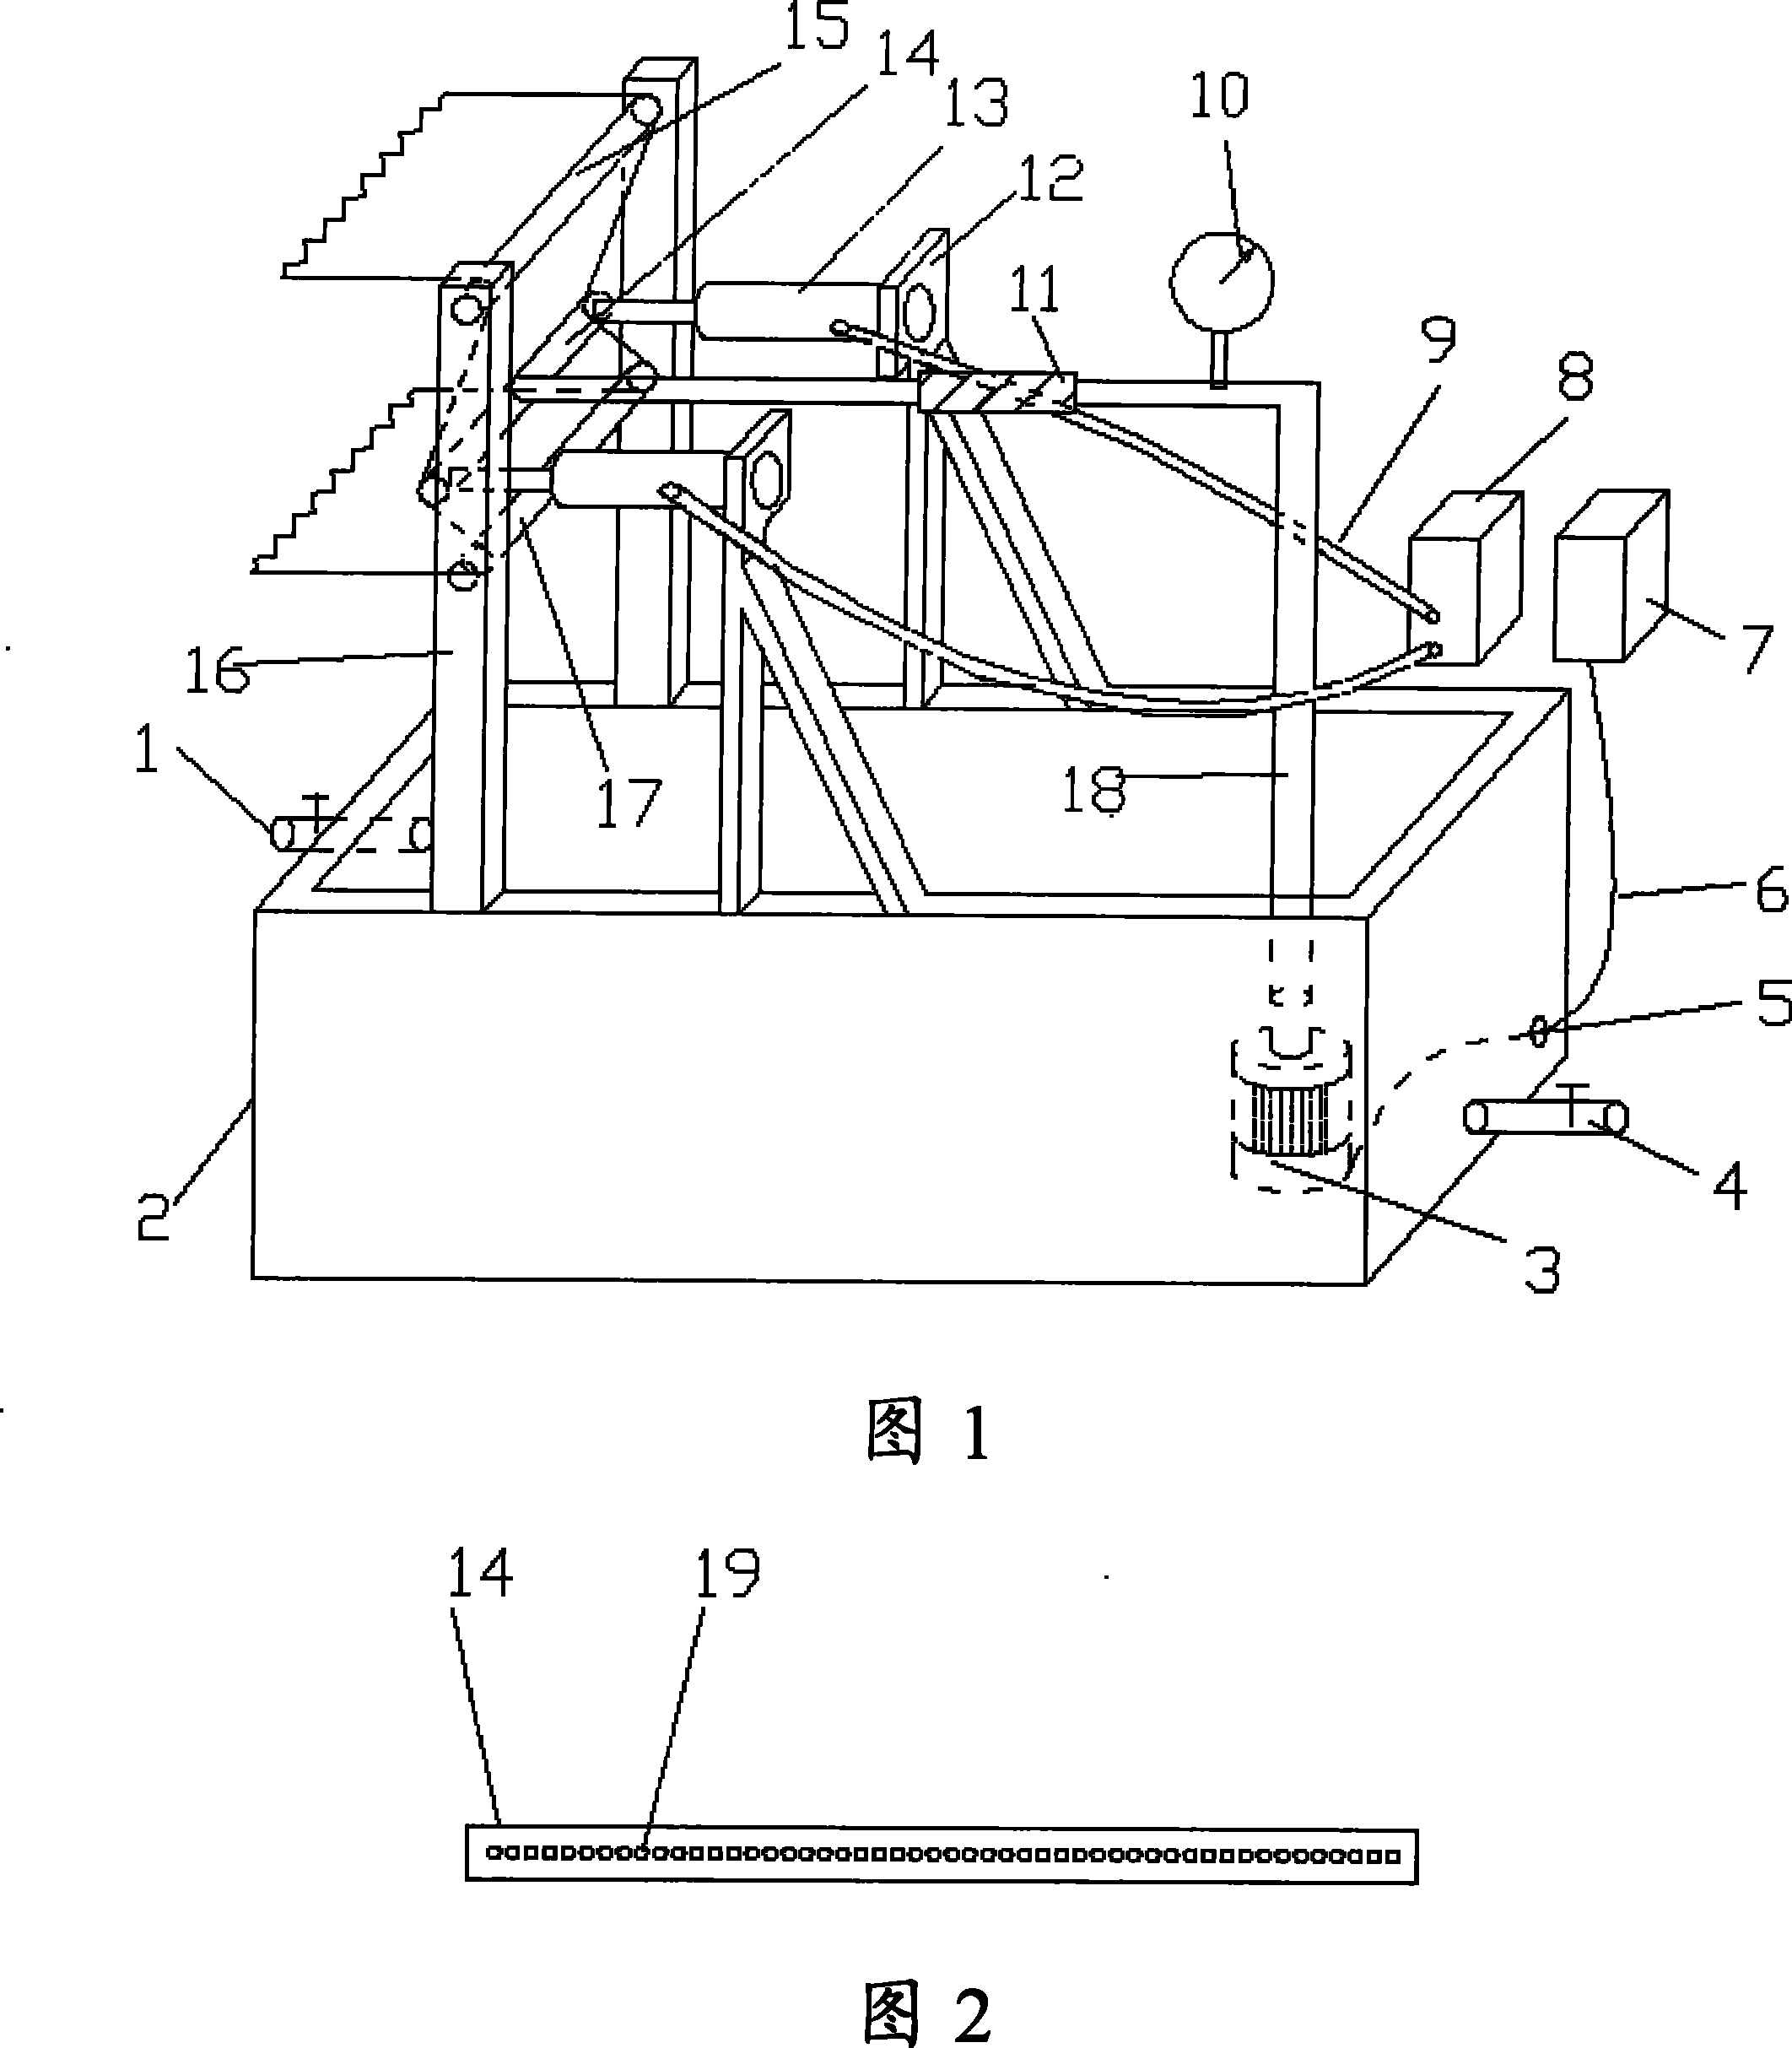 Jean topical finish injecting type damping device